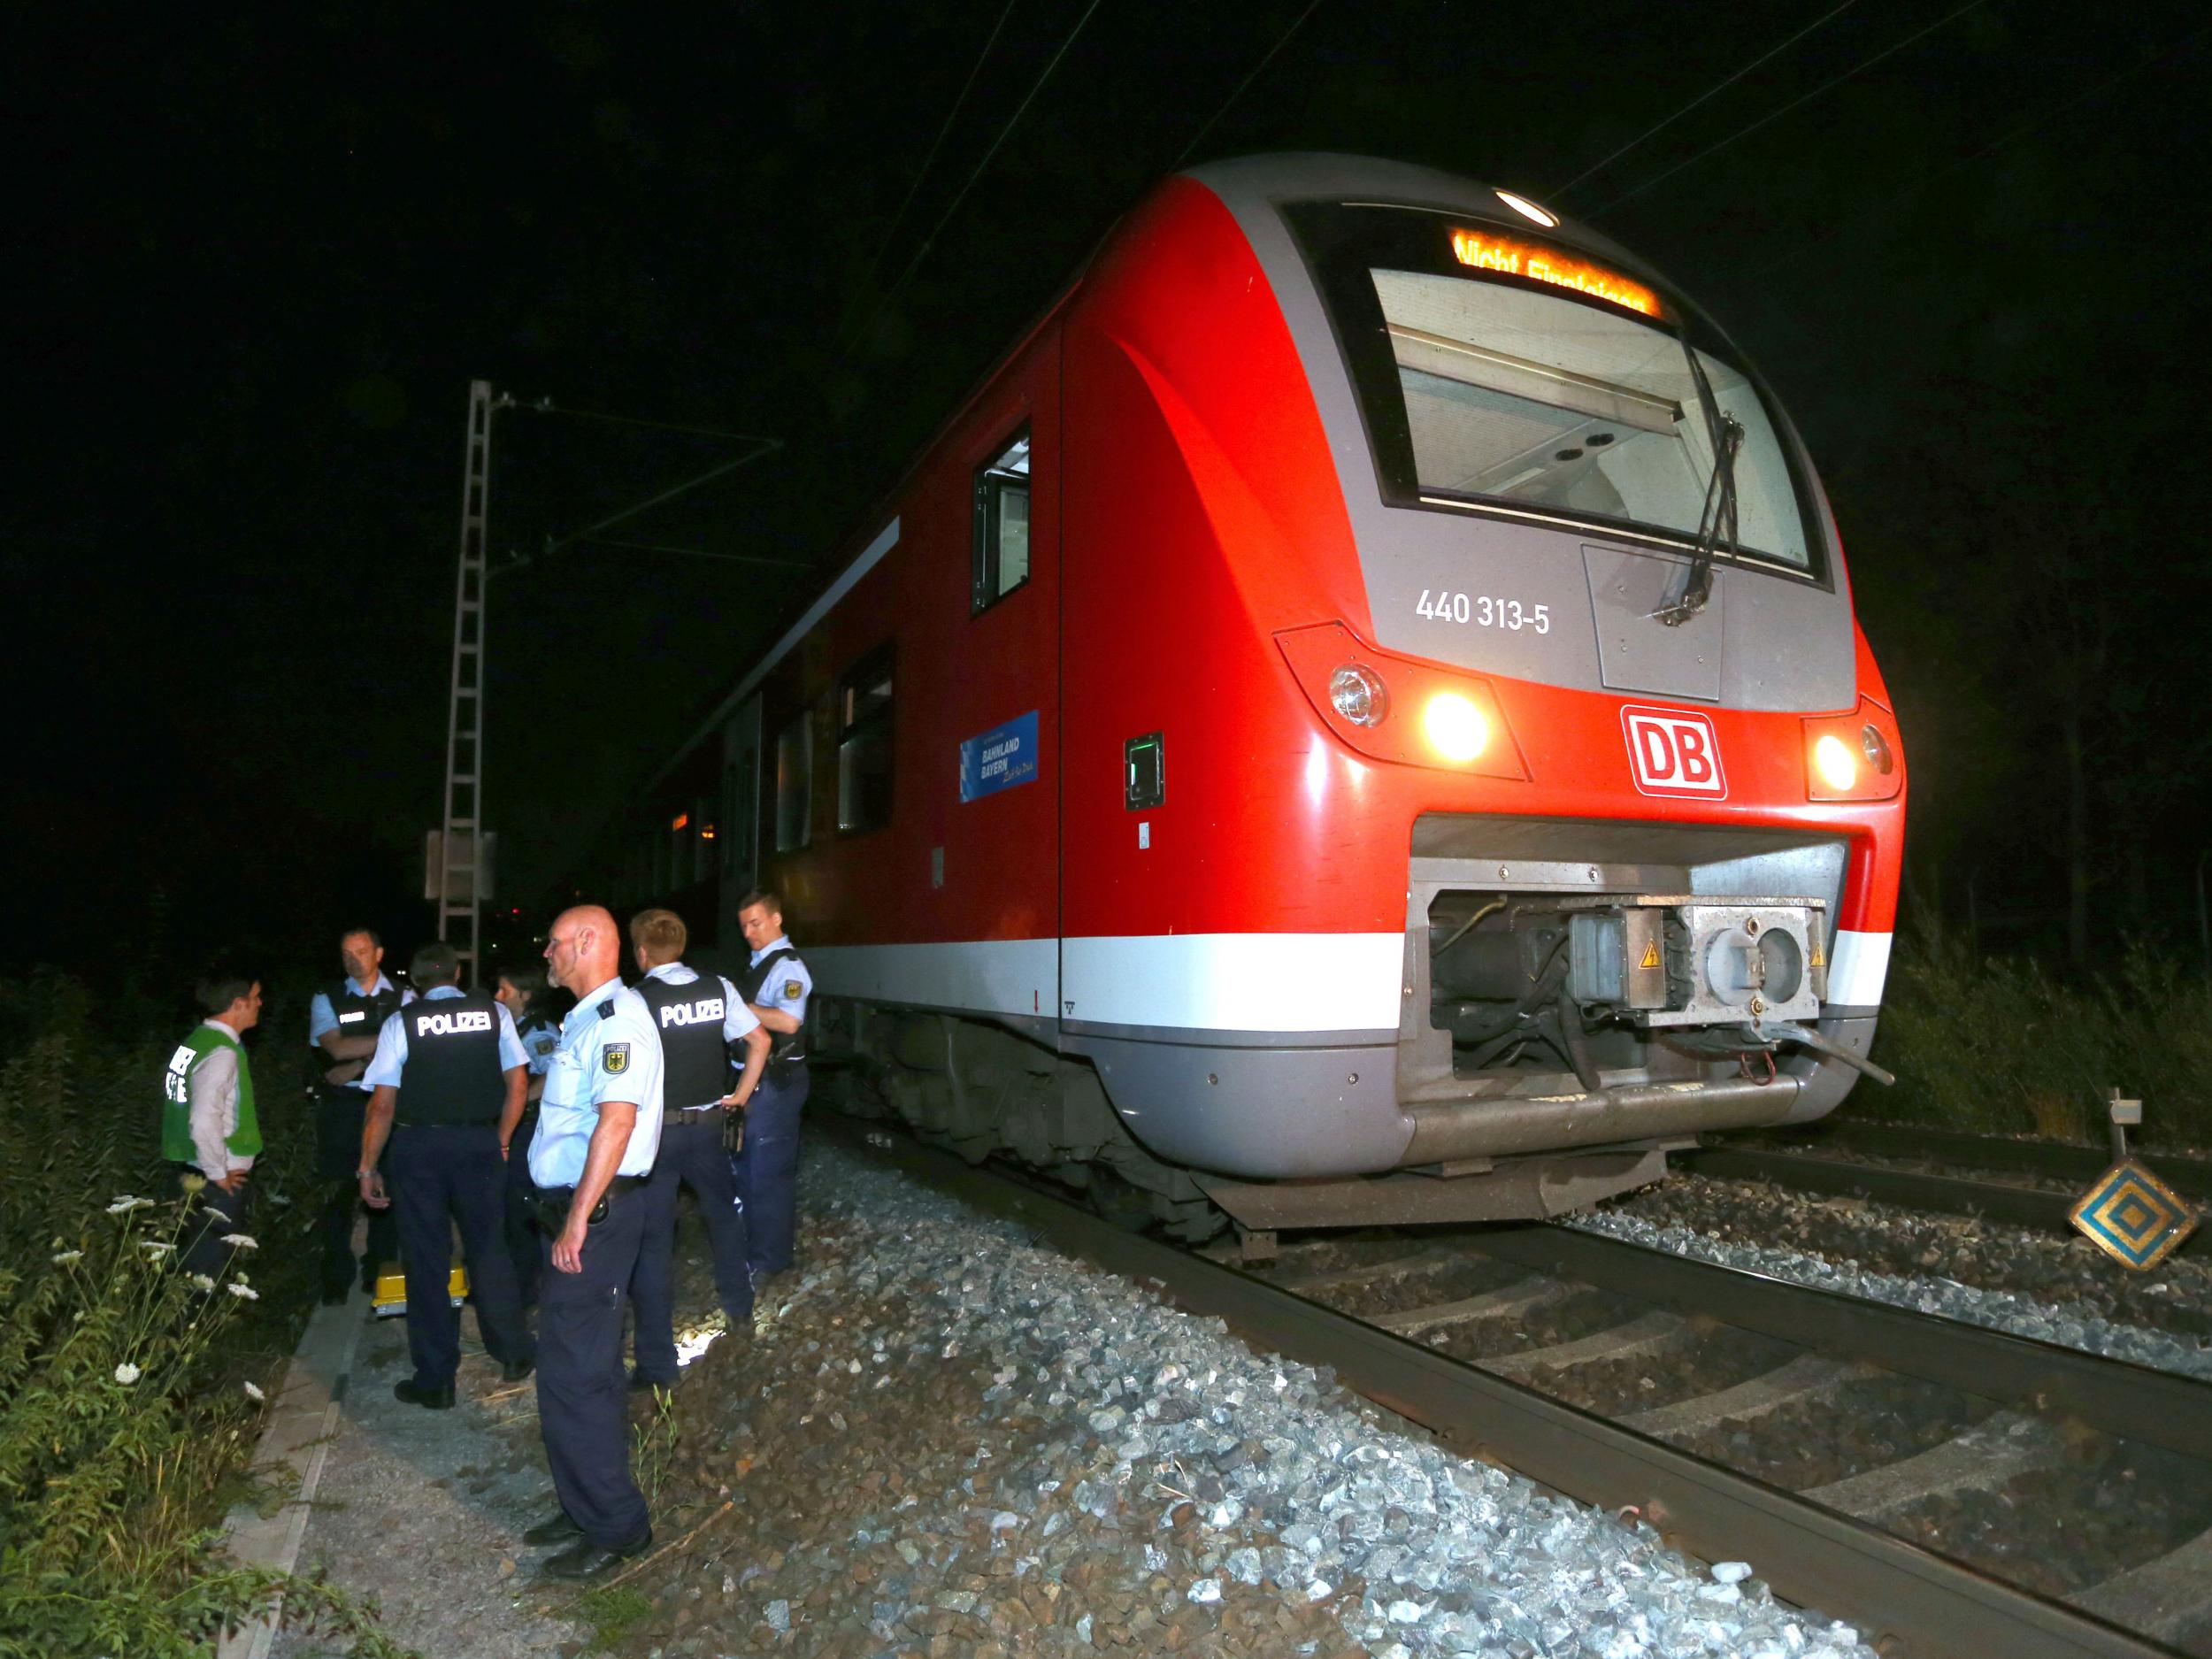 German police killed a teenage assailant after he attacked passengers on a train in Wuerzburg, southern Germany with an axe and a knife on 18 July, seriously wounding three people